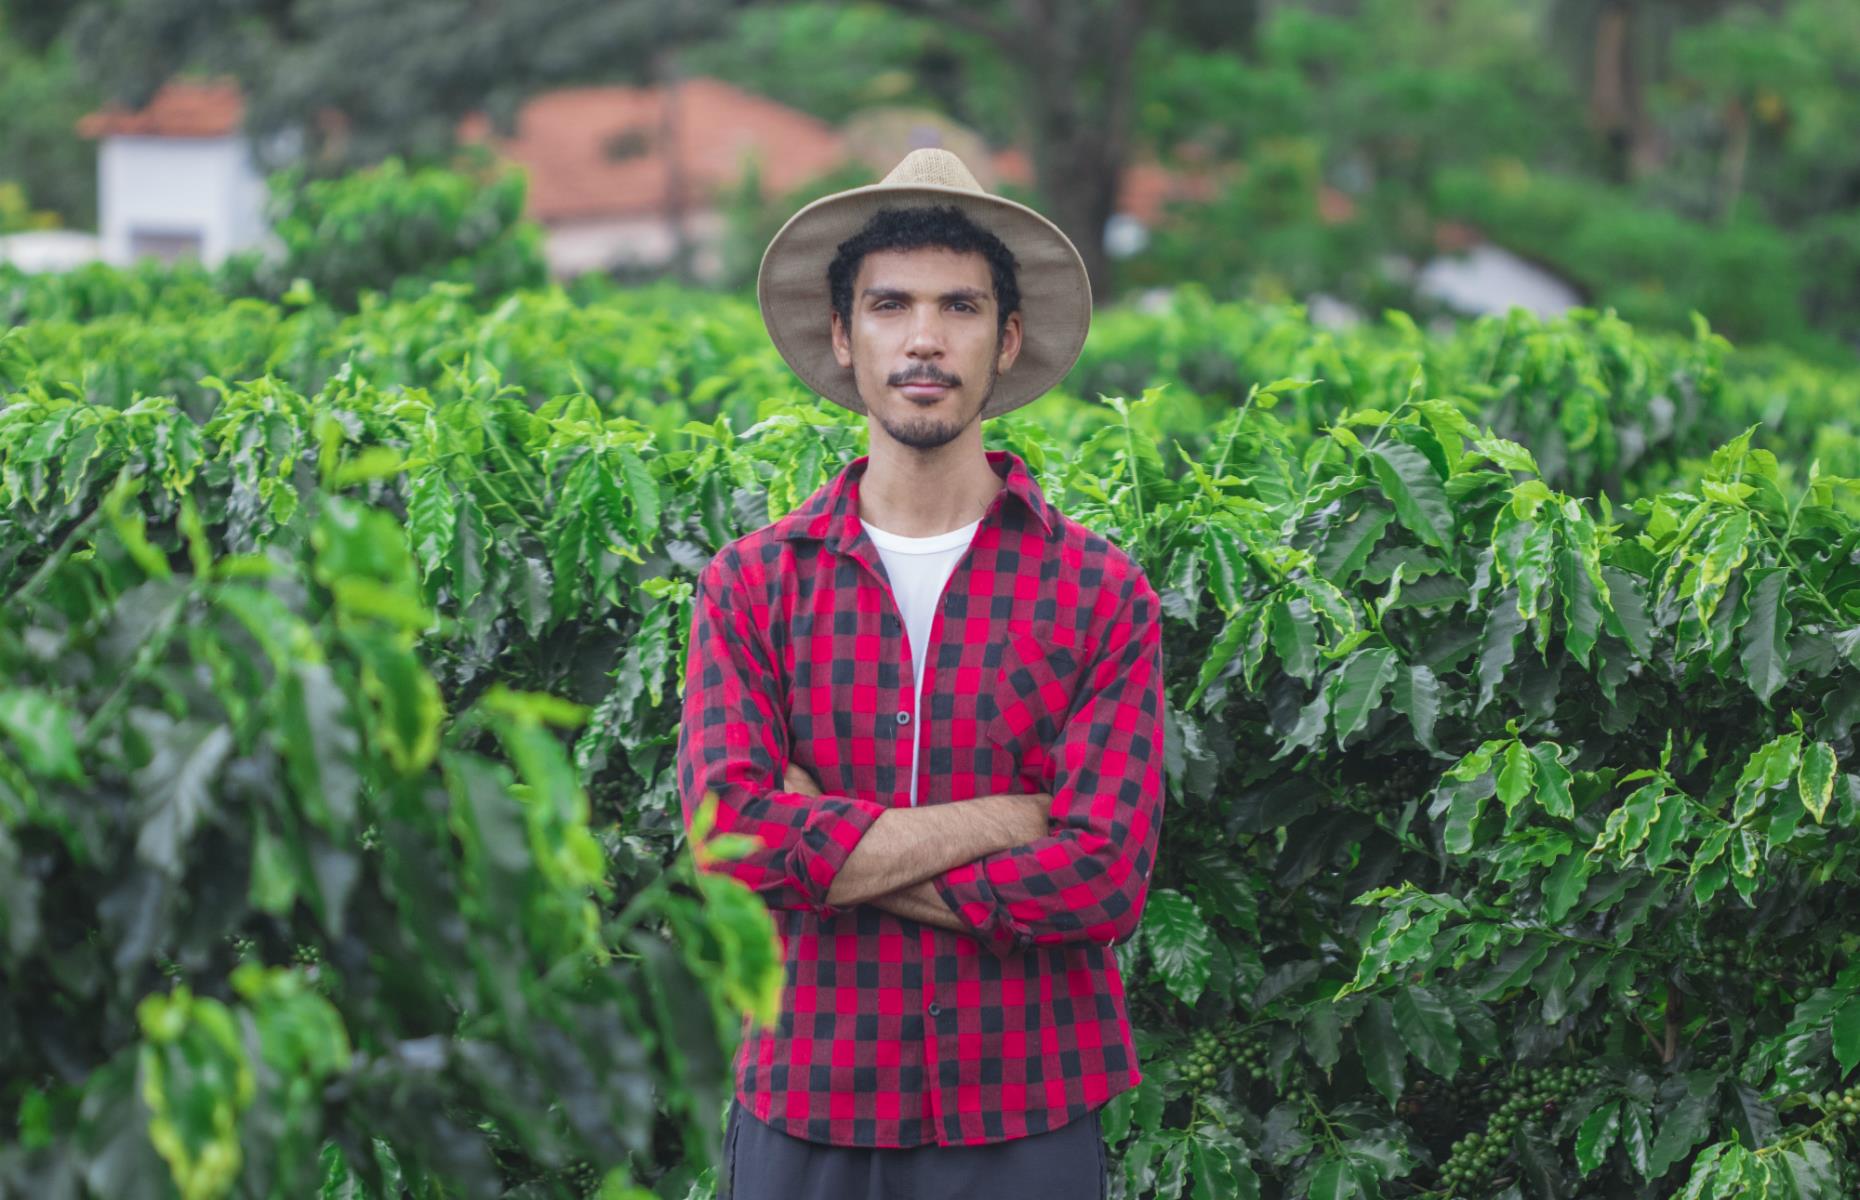 A lot of farmers depend on coffee